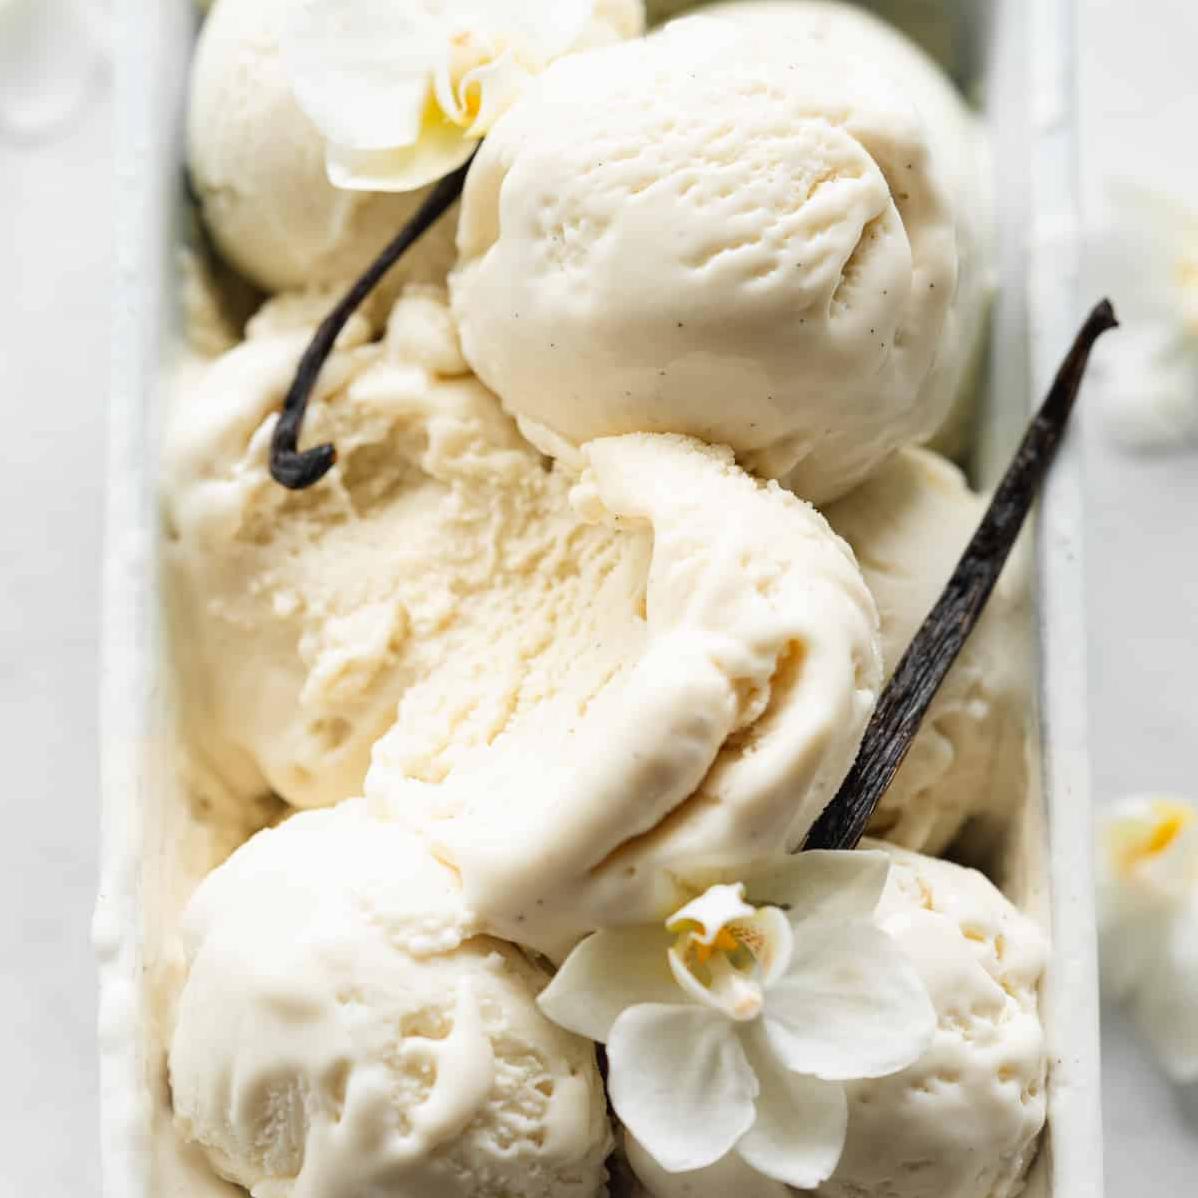  Chill out with this refreshing vegan vanilla ice cream